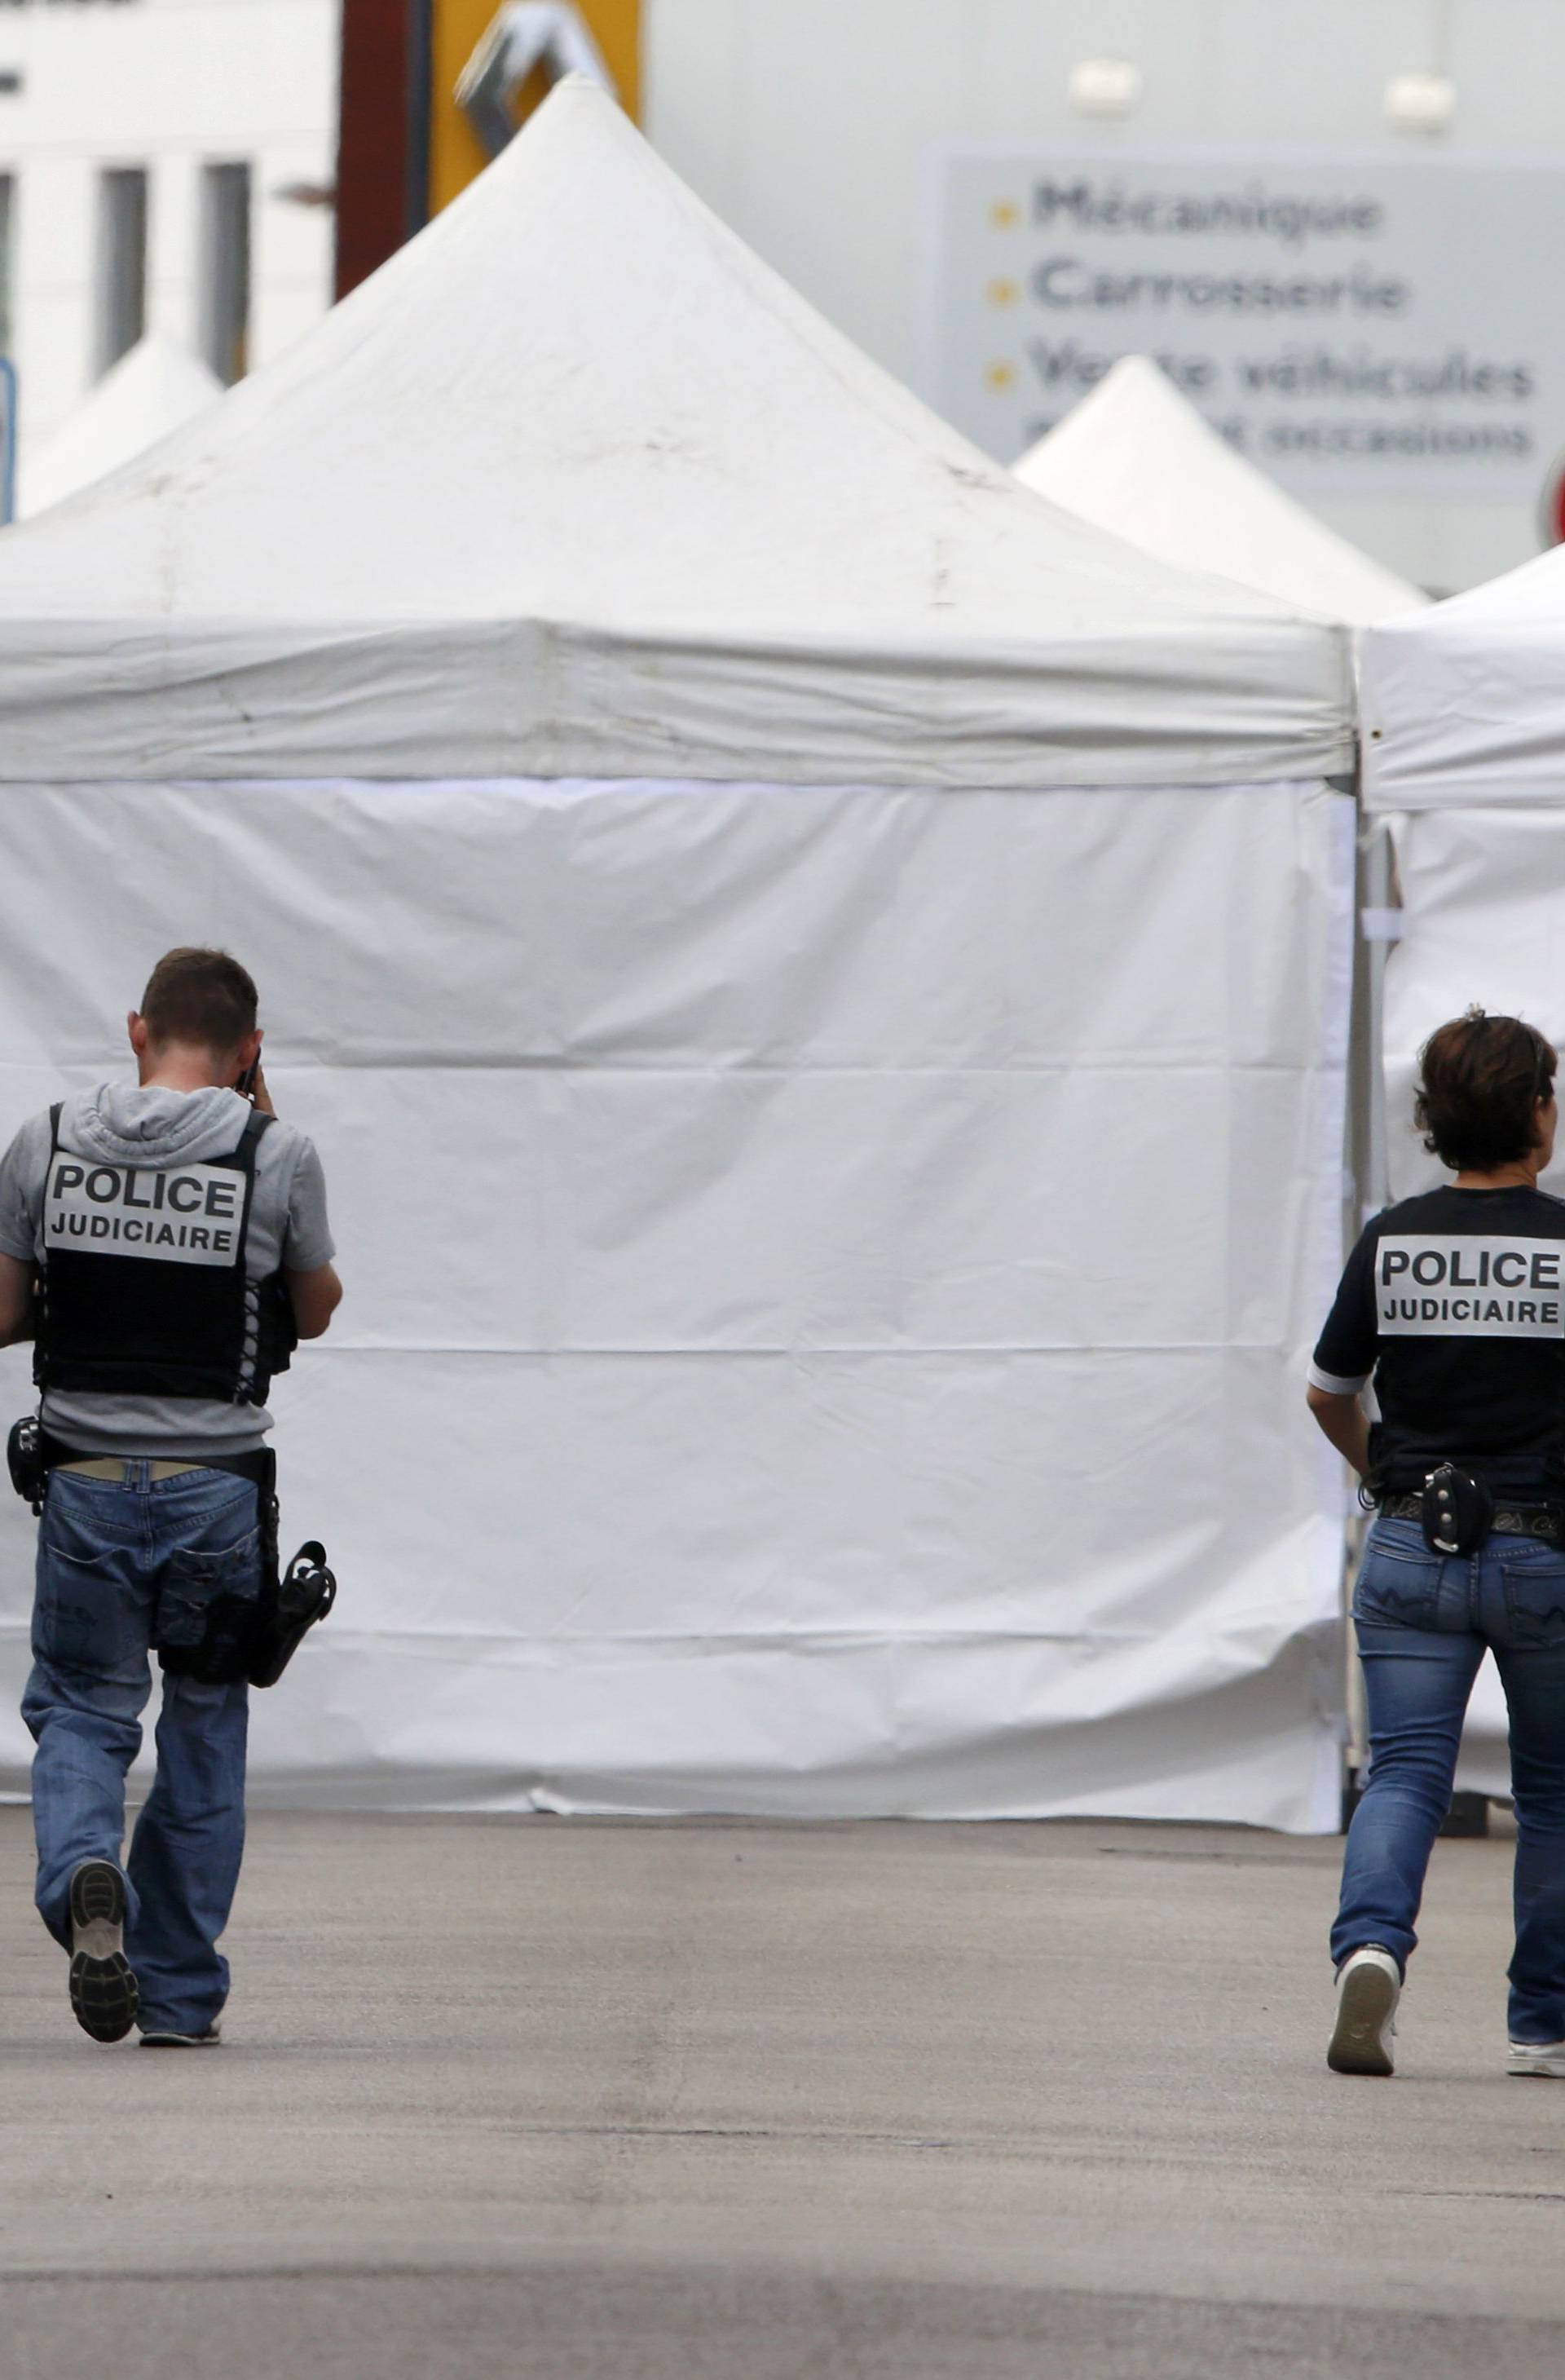  French police work near tents as the investigation continues near the church in Saint-Etienne-du-Rouvray near Rouen 